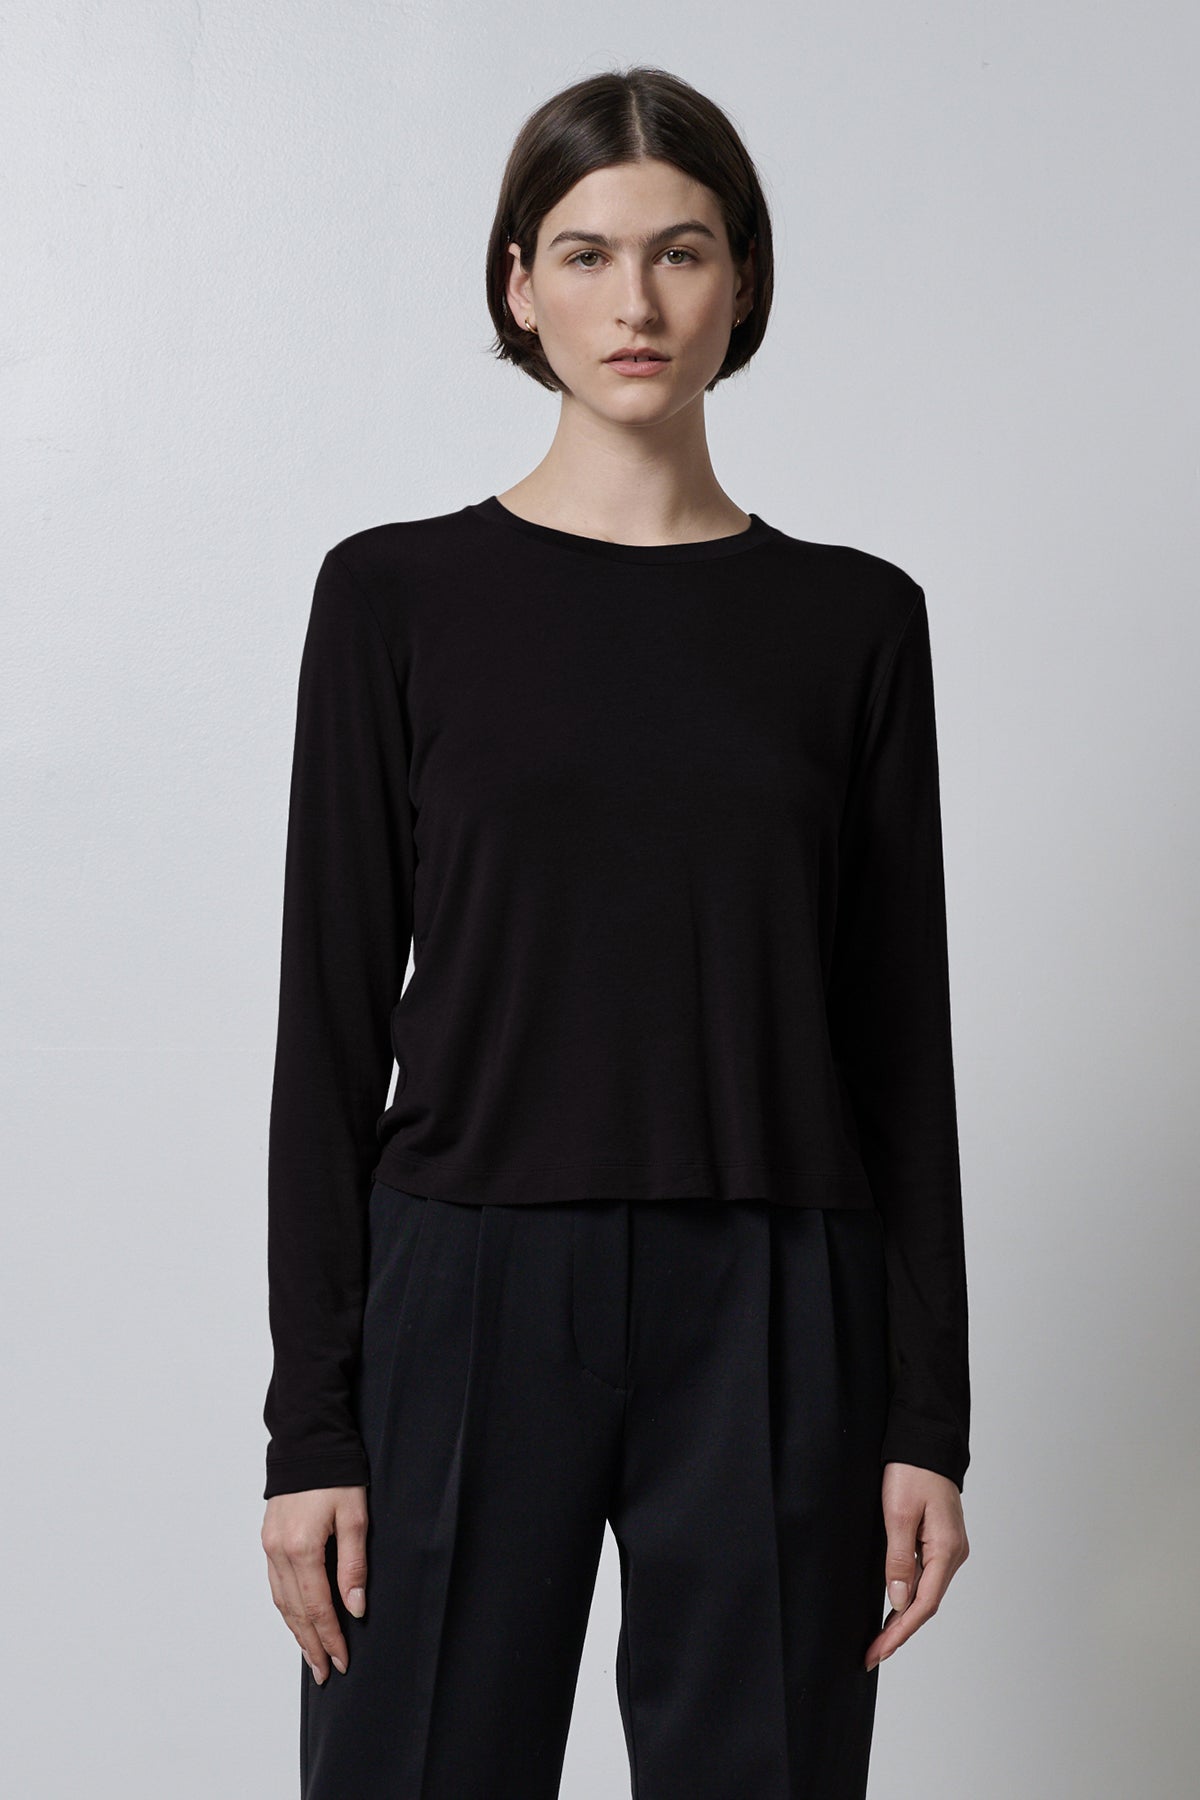   The model is wearing a black Velvet by Jenny Graham rib knit long sleeved top and stretch trousers. 